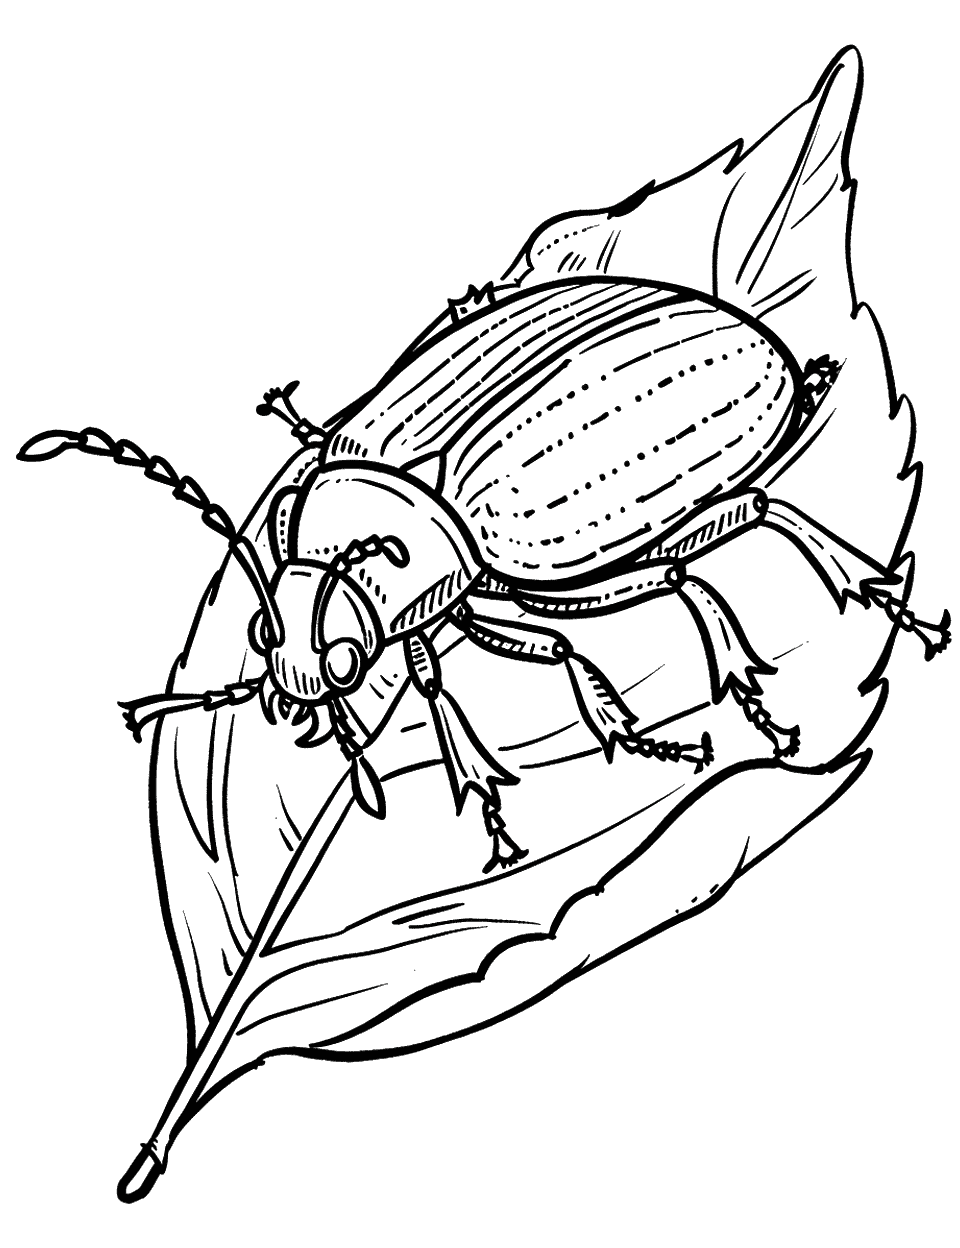 Beetle Climbing a Leaf Insect Coloring Page - A cute beetle scaling a leaf.